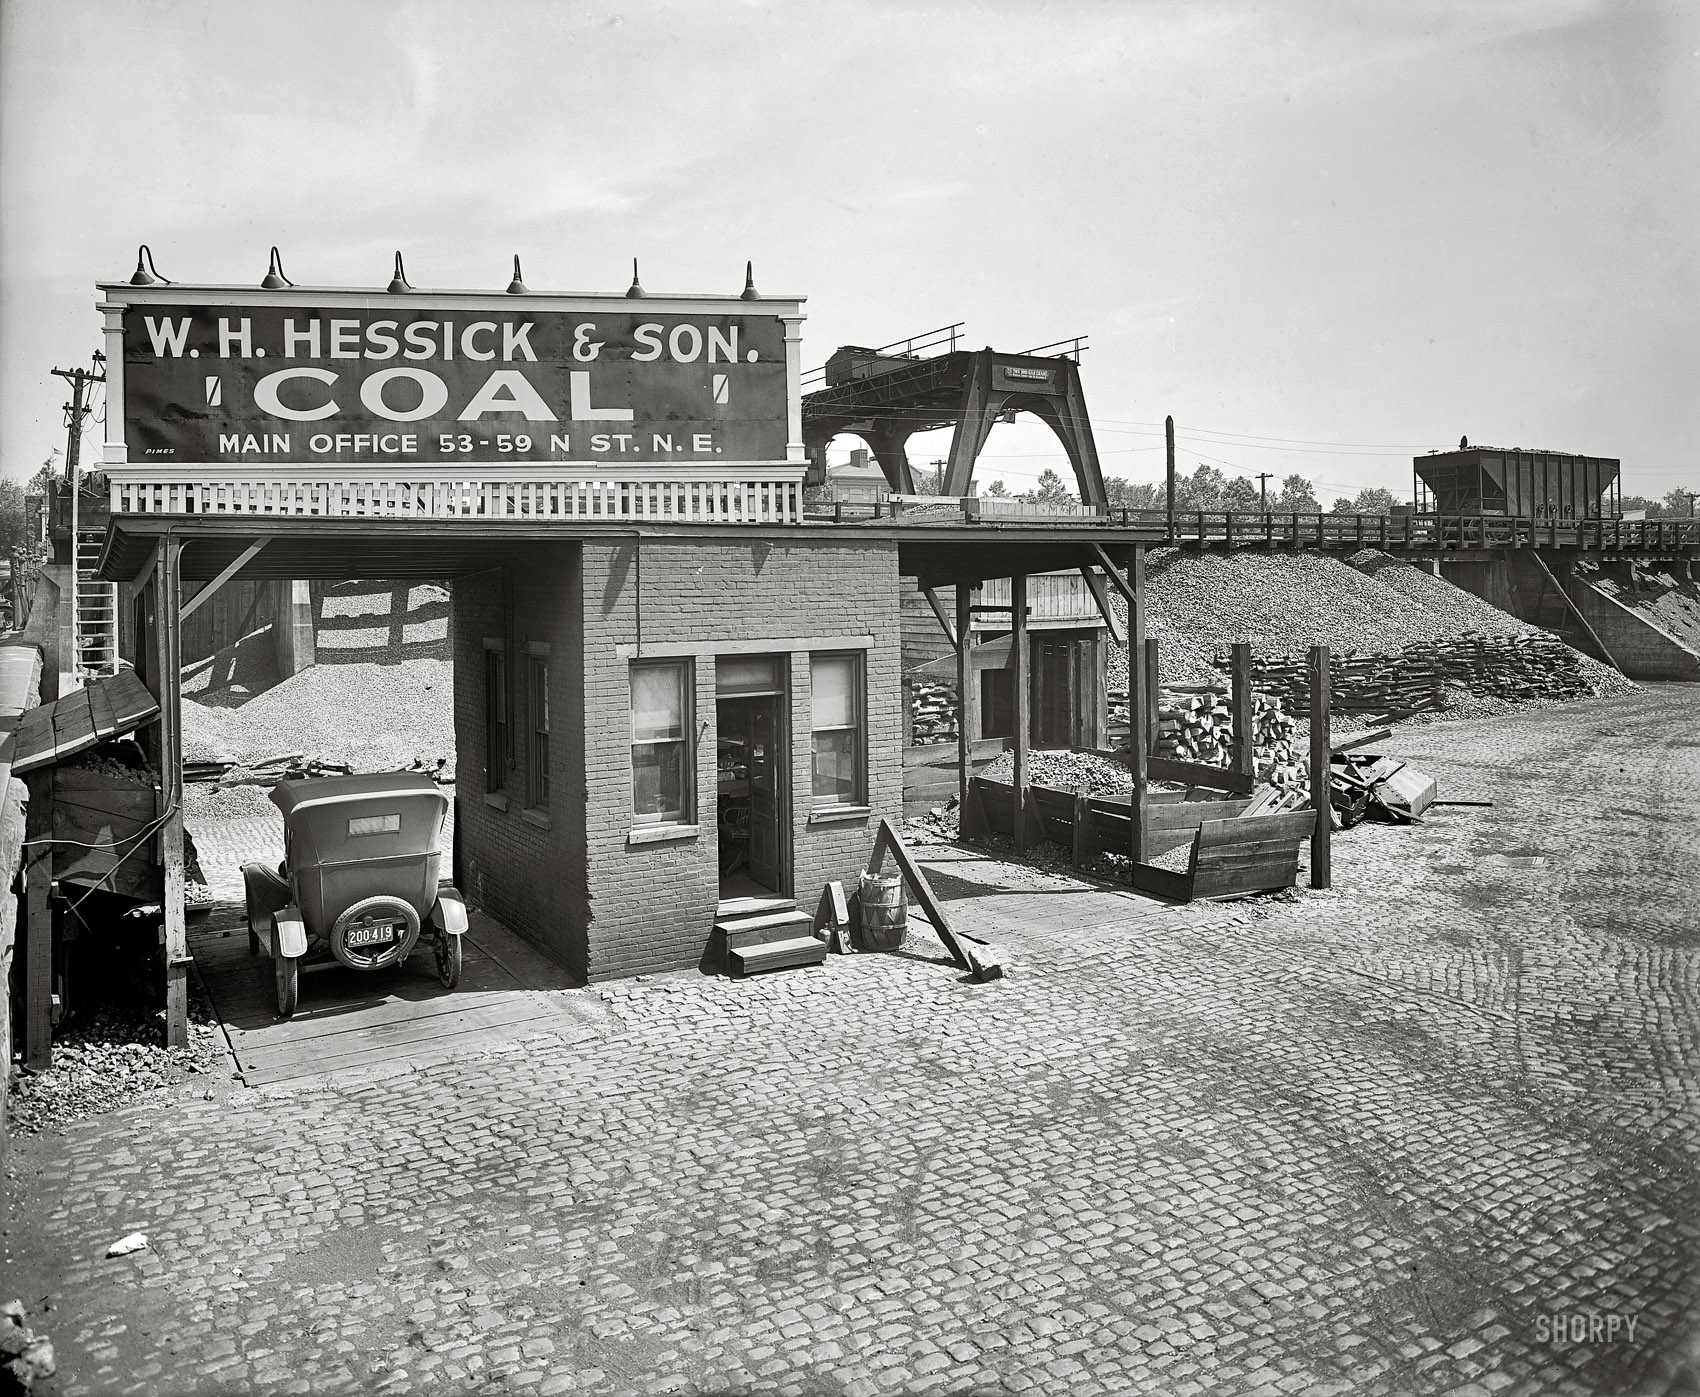 Washington, D.C., 1925. "Hessick & Son Coal Co." The company's catchy slogan: "Anthracite and Bituminous Coal in All Sizes (Furnace, Stove, Egg, Chestnut, Pea) for Immediate Delivery." National Photo Co. glass negative. View full size.